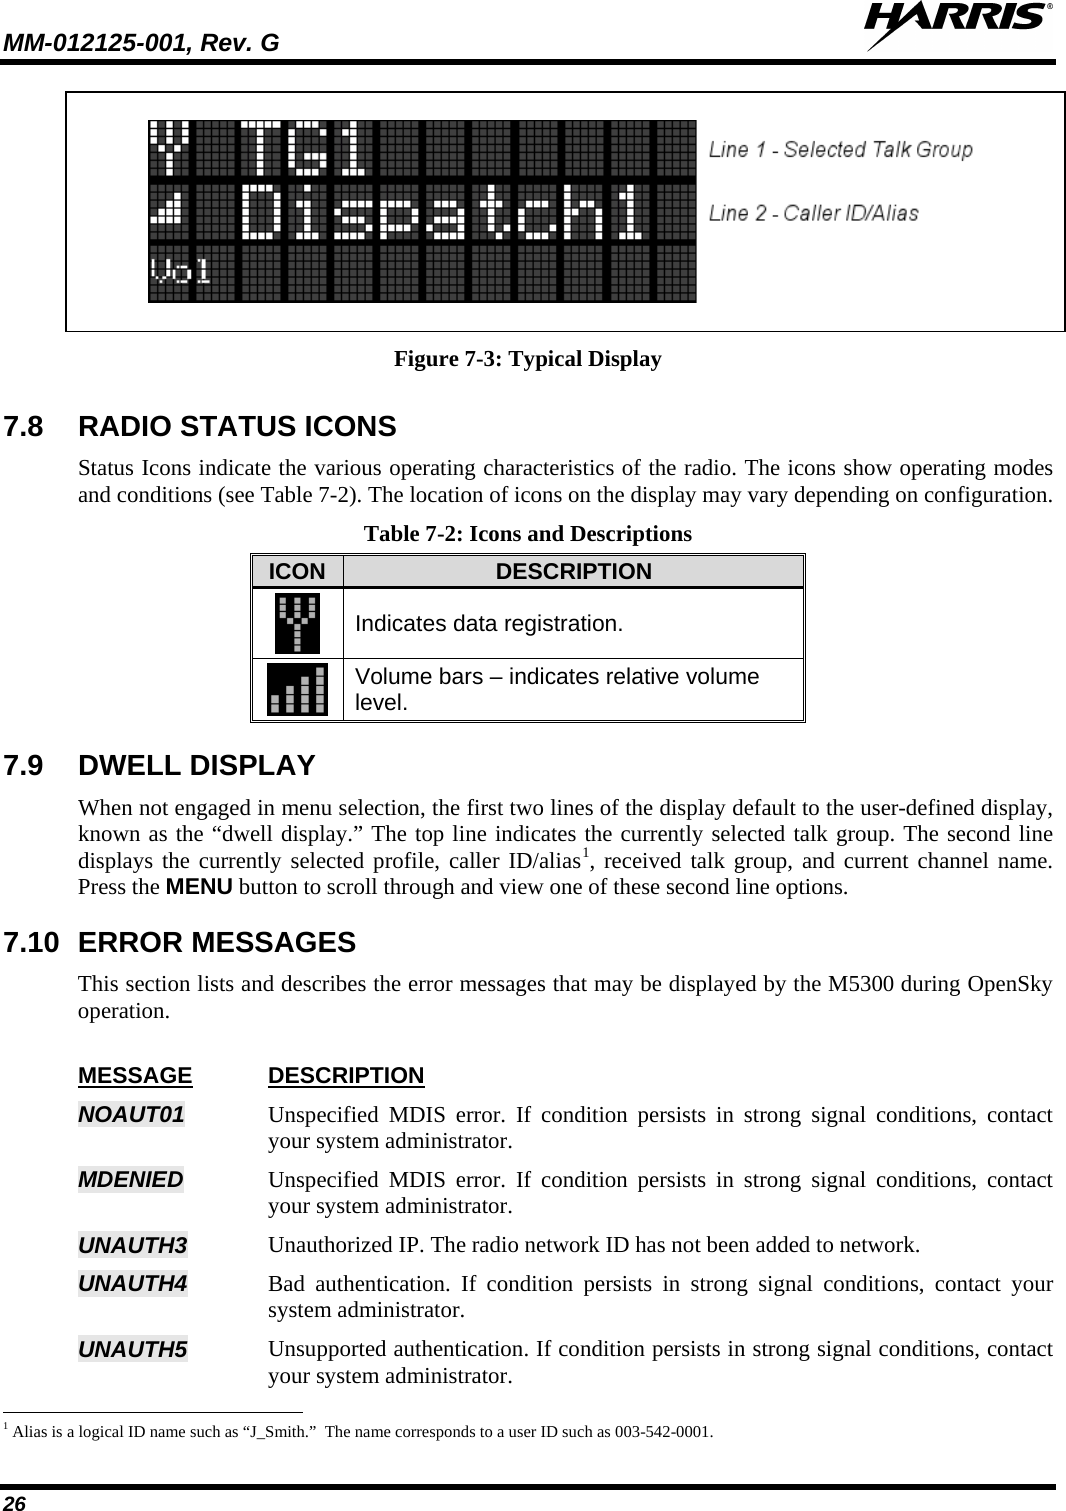 MM-012125-001, Rev. G   26    Figure 7-3: Typical Display 7.8 RADIO STATUS ICONS Status Icons indicate the various operating characteristics of the radio. The icons show operating modes and conditions (see Table 7-2). The location of icons on the display may vary depending on configuration. Table 7-2: Icons and Descriptions ICON DESCRIPTION  Indicates data registration.  Volume bars – indicates relative volume level. 7.9 DWELL DISPLAY When not engaged in menu selection, the first two lines of the display default to the user-defined display, known as the “dwell display.” The top line indicates the currently selected talk group. The second line displays the currently selected profile, caller ID/alias17.10 ERROR MESSAGES , received talk group, and current channel name. Press the MENU button to scroll through and view one of these second line options.  This section lists and describes the error messages that may be displayed by the M5300 during OpenSky operation.  MESSAGE NOAUT01 DESCRIPTION Unspecified MDIS error. If condition persists in strong signal conditions, contact your system administrator. MDENIED  Unspecified MDIS error. If condition persists in strong signal conditions, contact your system administrator. UNAUTH3 Unauthorized IP. The radio network ID has not been added to network. UNAUTH4 Bad authentication. If condition persists in strong signal conditions, contact your system administrator. UNAUTH5 Unsupported authentication. If condition persists in strong signal conditions, contact your system administrator.                                                            1 Alias is a logical ID name such as “J_Smith.”  The name corresponds to a user ID such as 003-542-0001. 